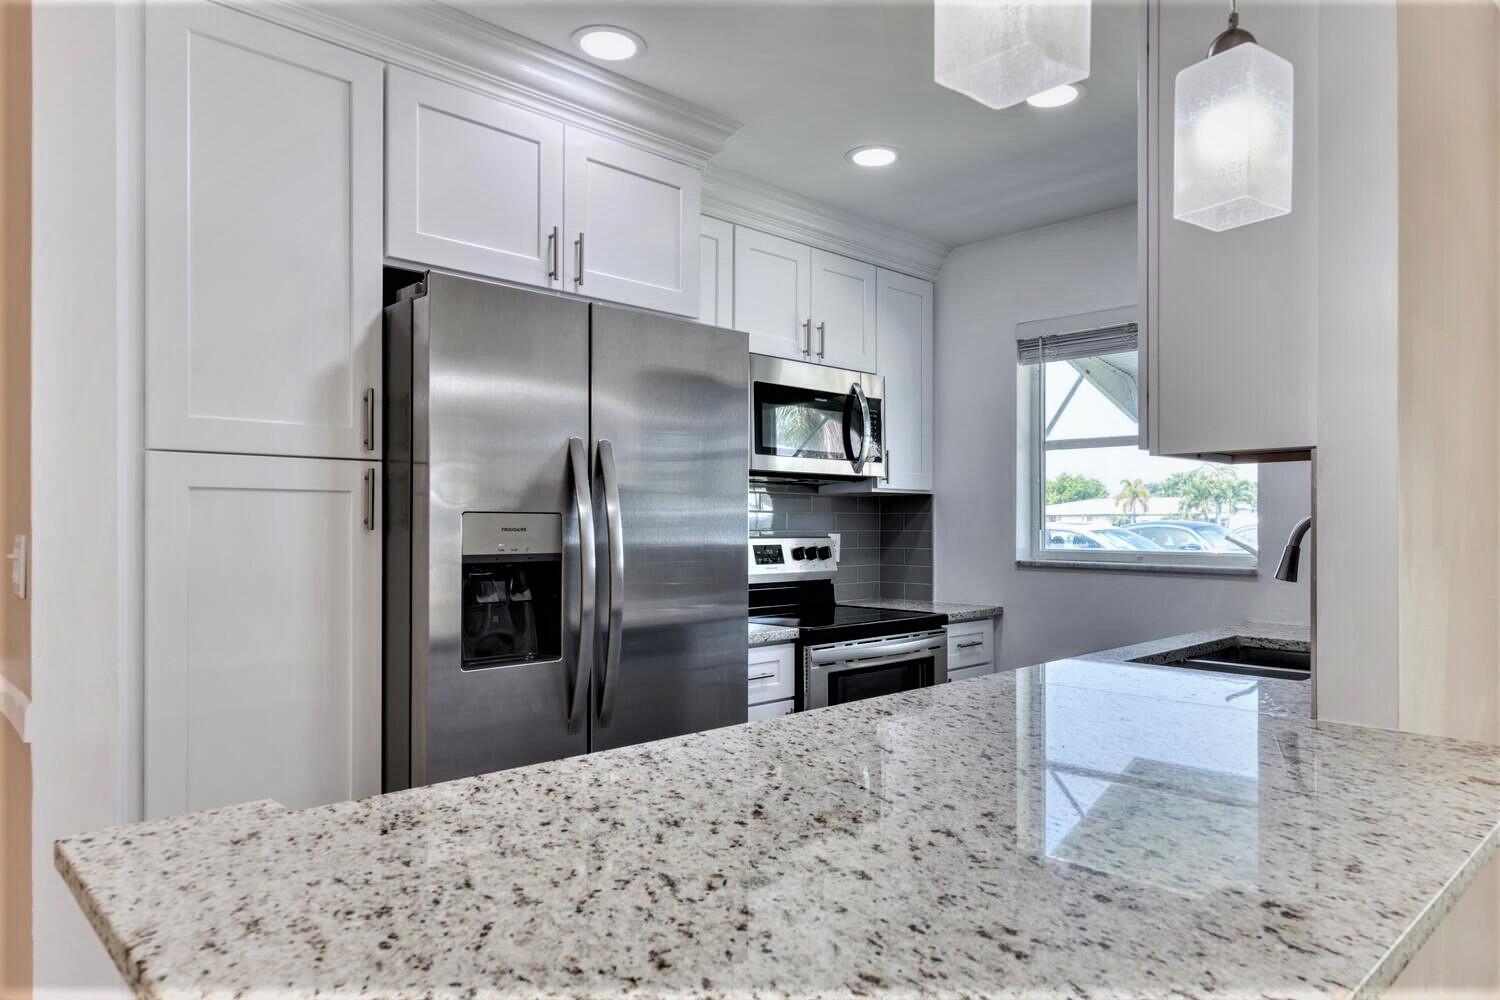 a kitchen with stainless steel appliances kitchen island granite countertop a refrigerator stove top oven and sink